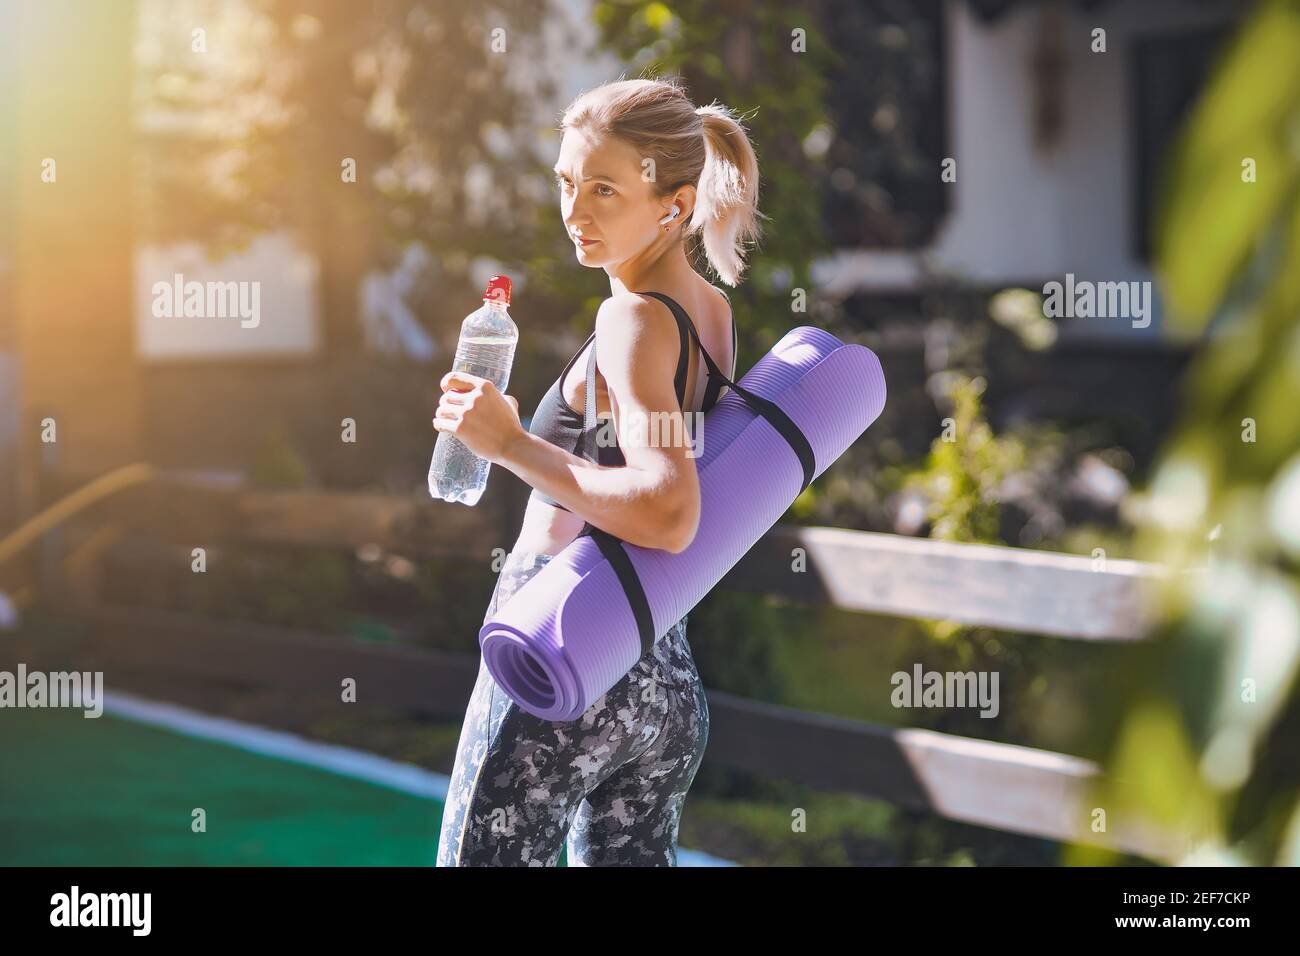 https://c8.alamy.com/comp/2EF7CKP/woman-in-sport-clothes-holding-a-yoga-mat-and-water-bottle-after-workout-2EF7CKP.jpg